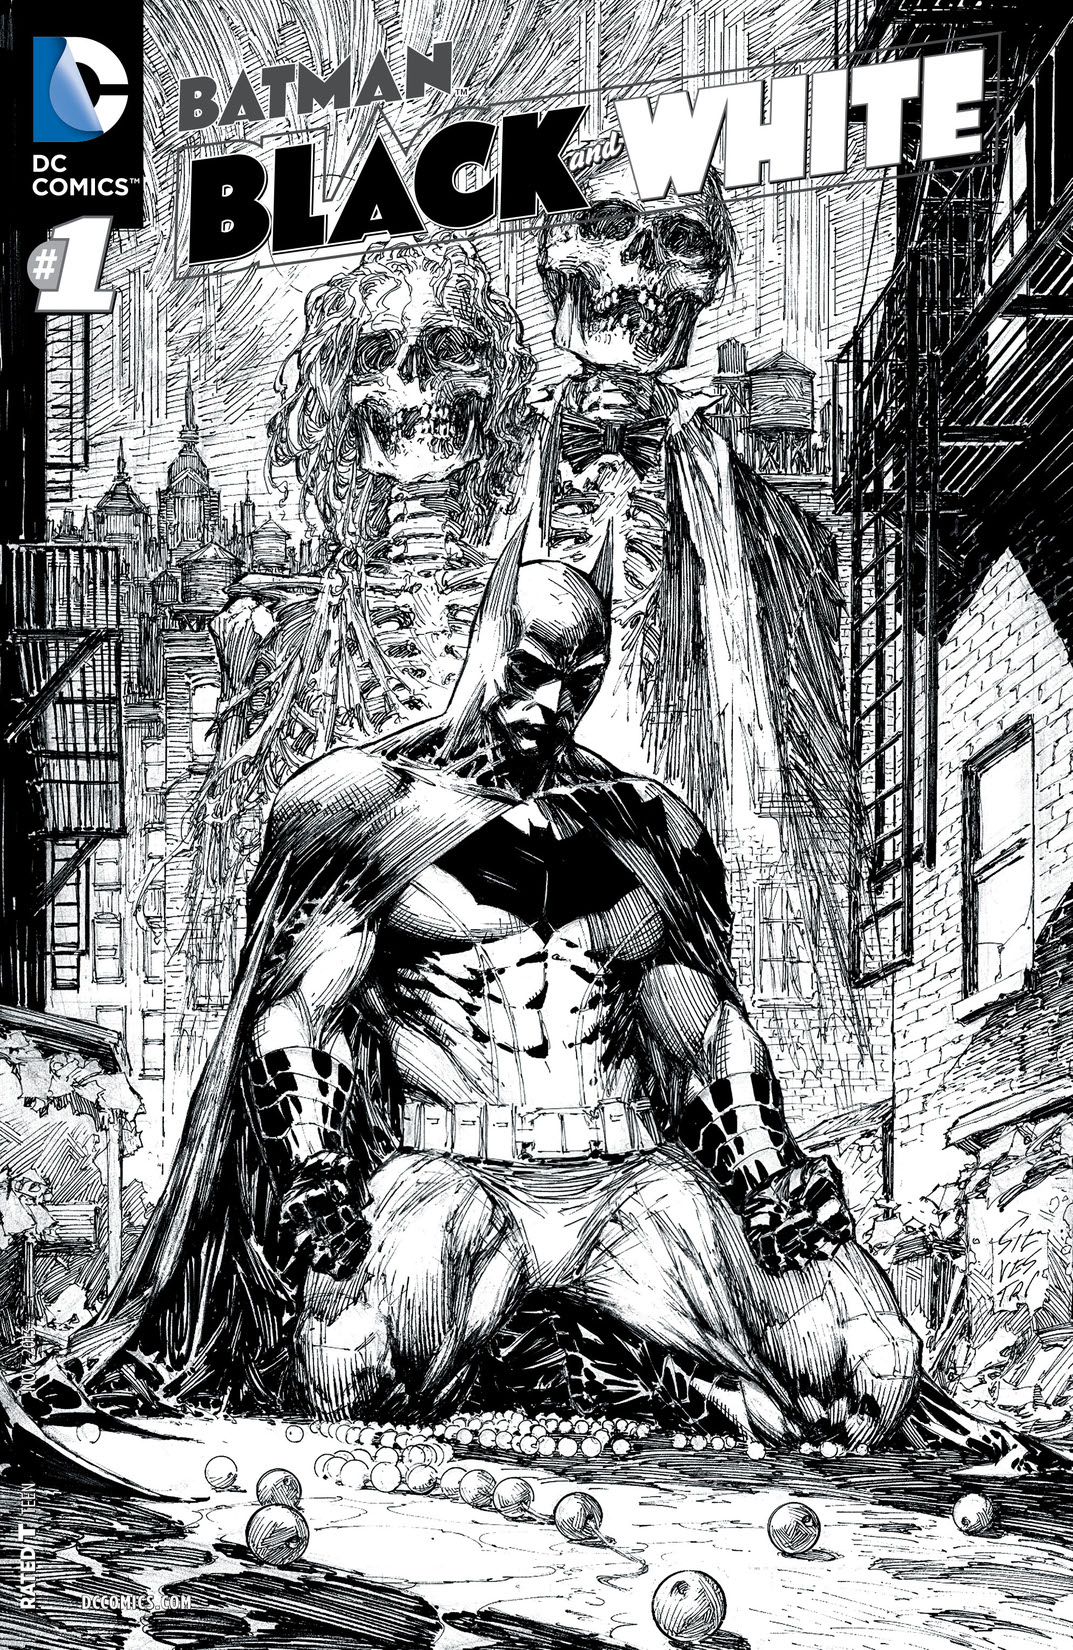 Batman Black and White (2013-) #1 preview images